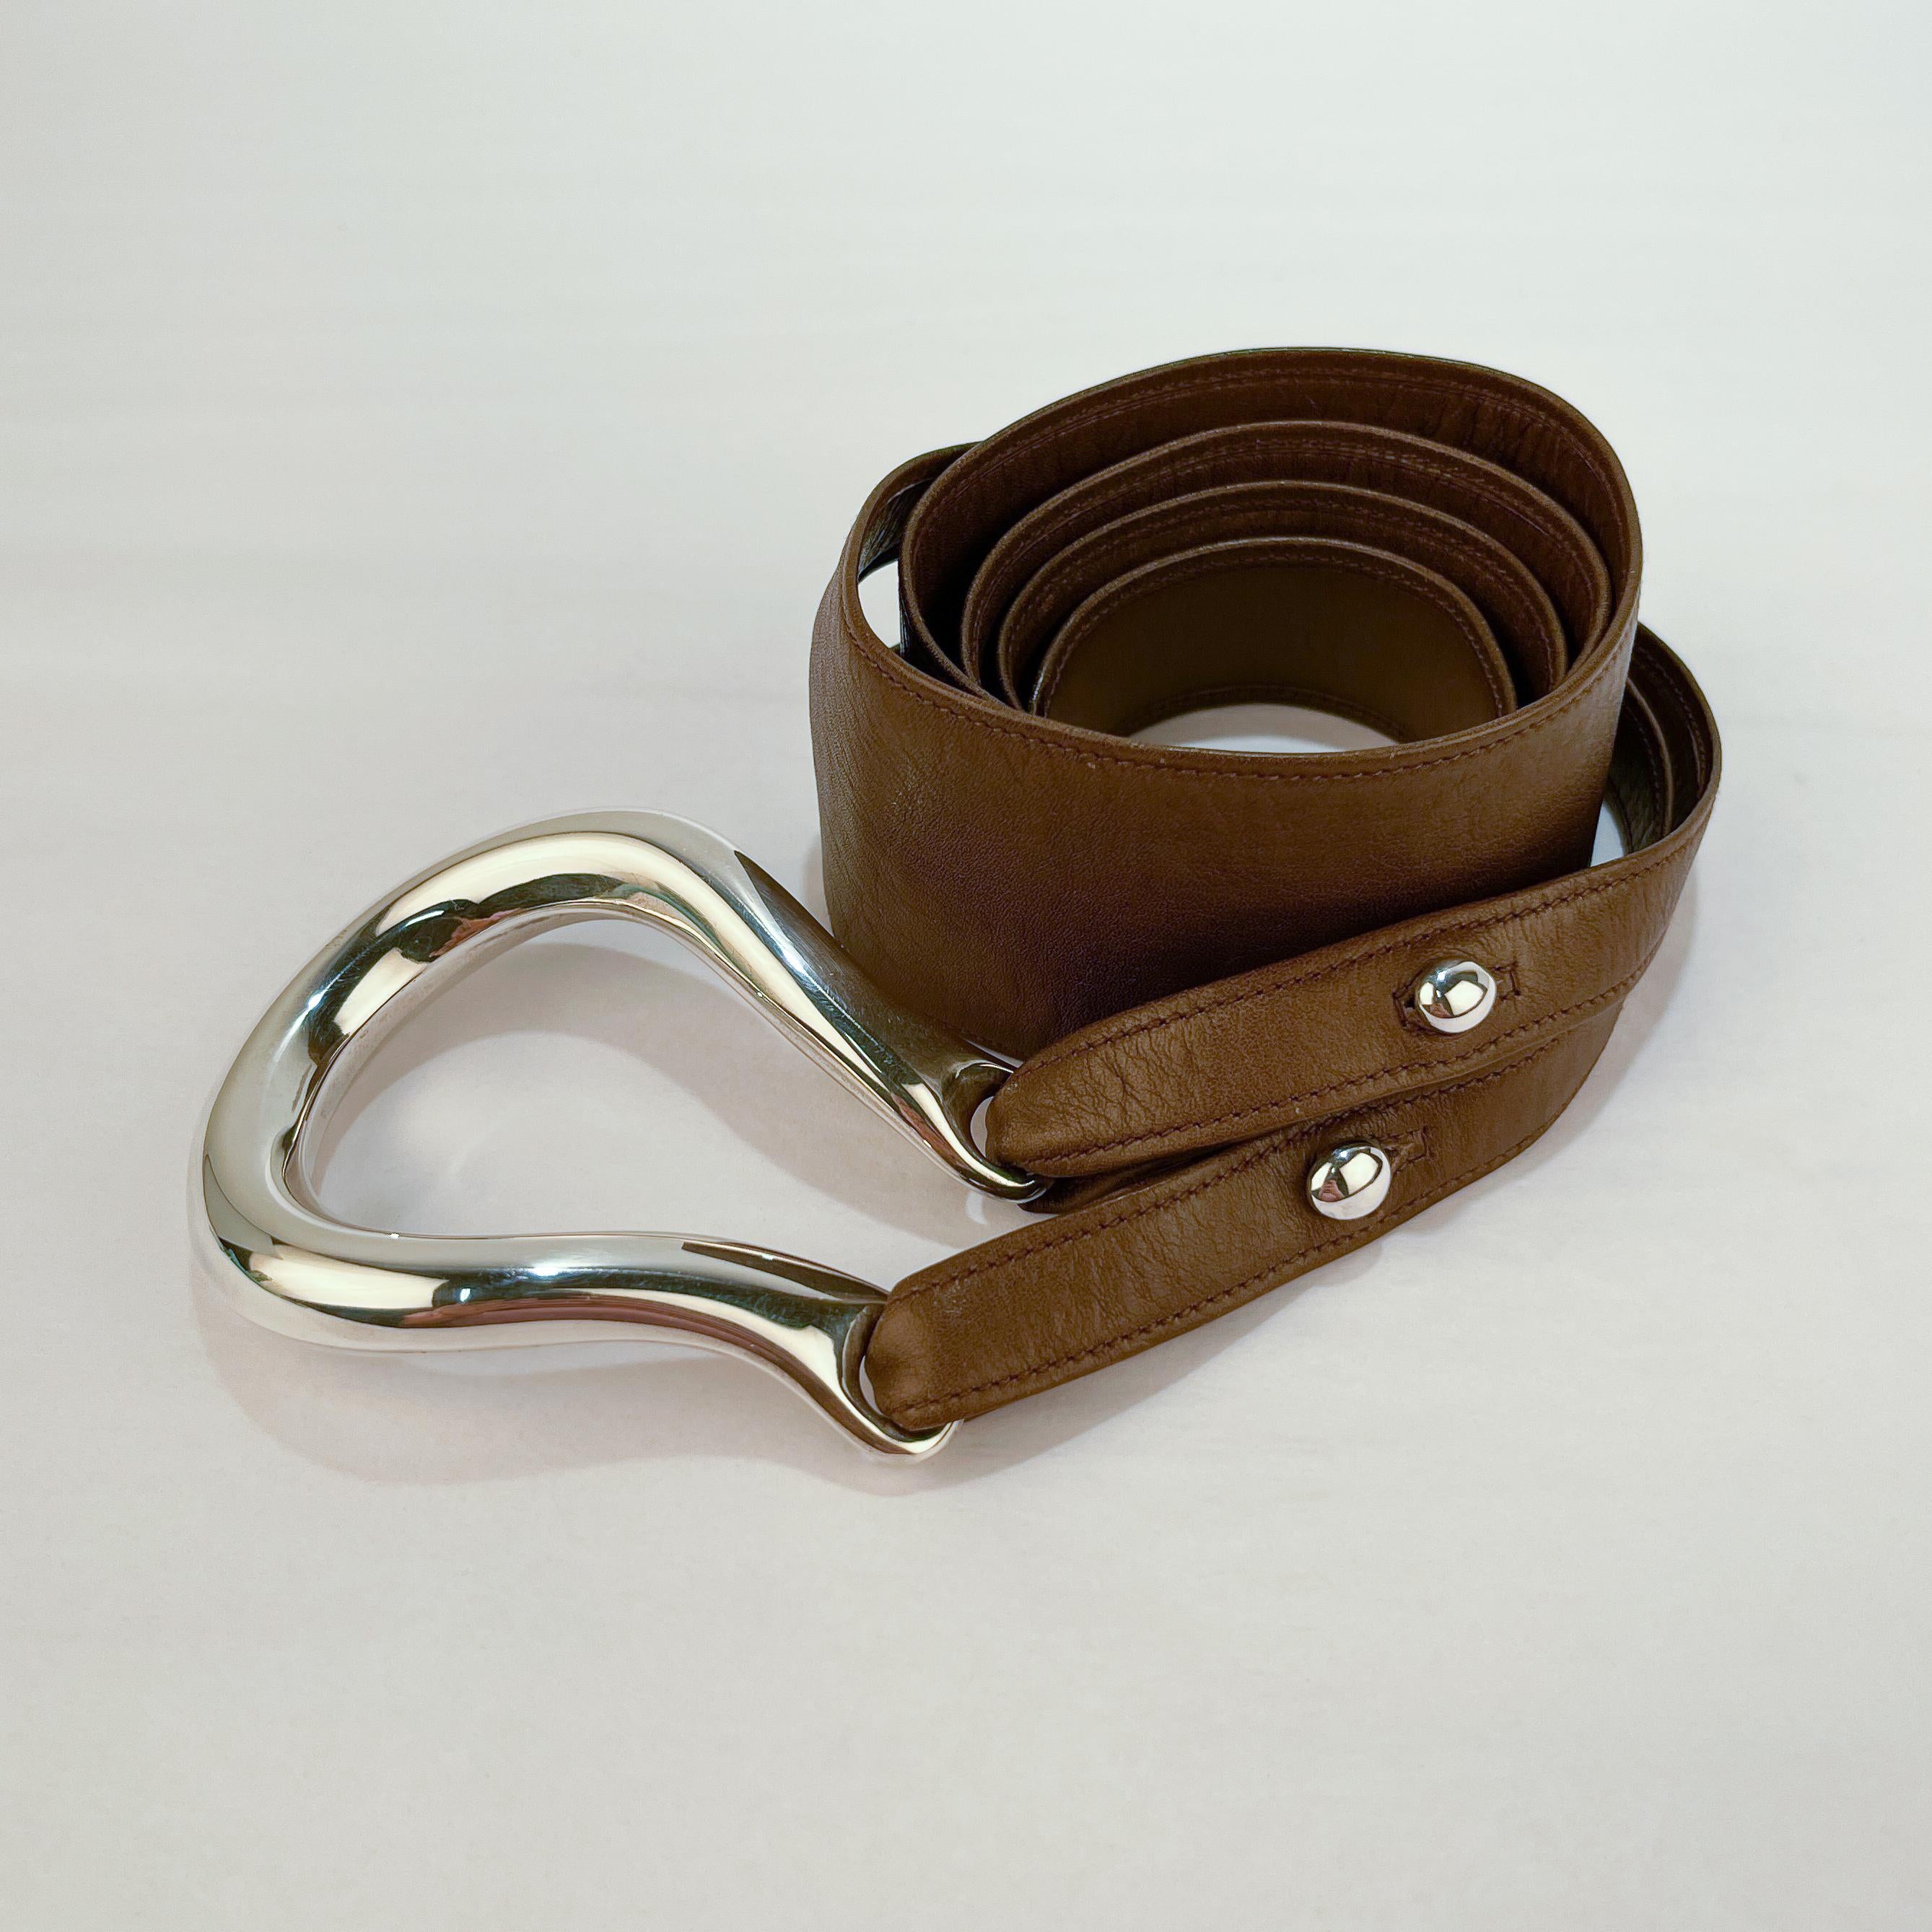 A fine Tiffany & Co. leather belt.

Consisting of a split strap brown leather belt and sterling silver horseshoe shaped buckle and buttons. The leather belt loops through the buckle for closure and variable sizings.

Designed by Elsa Peretti in the